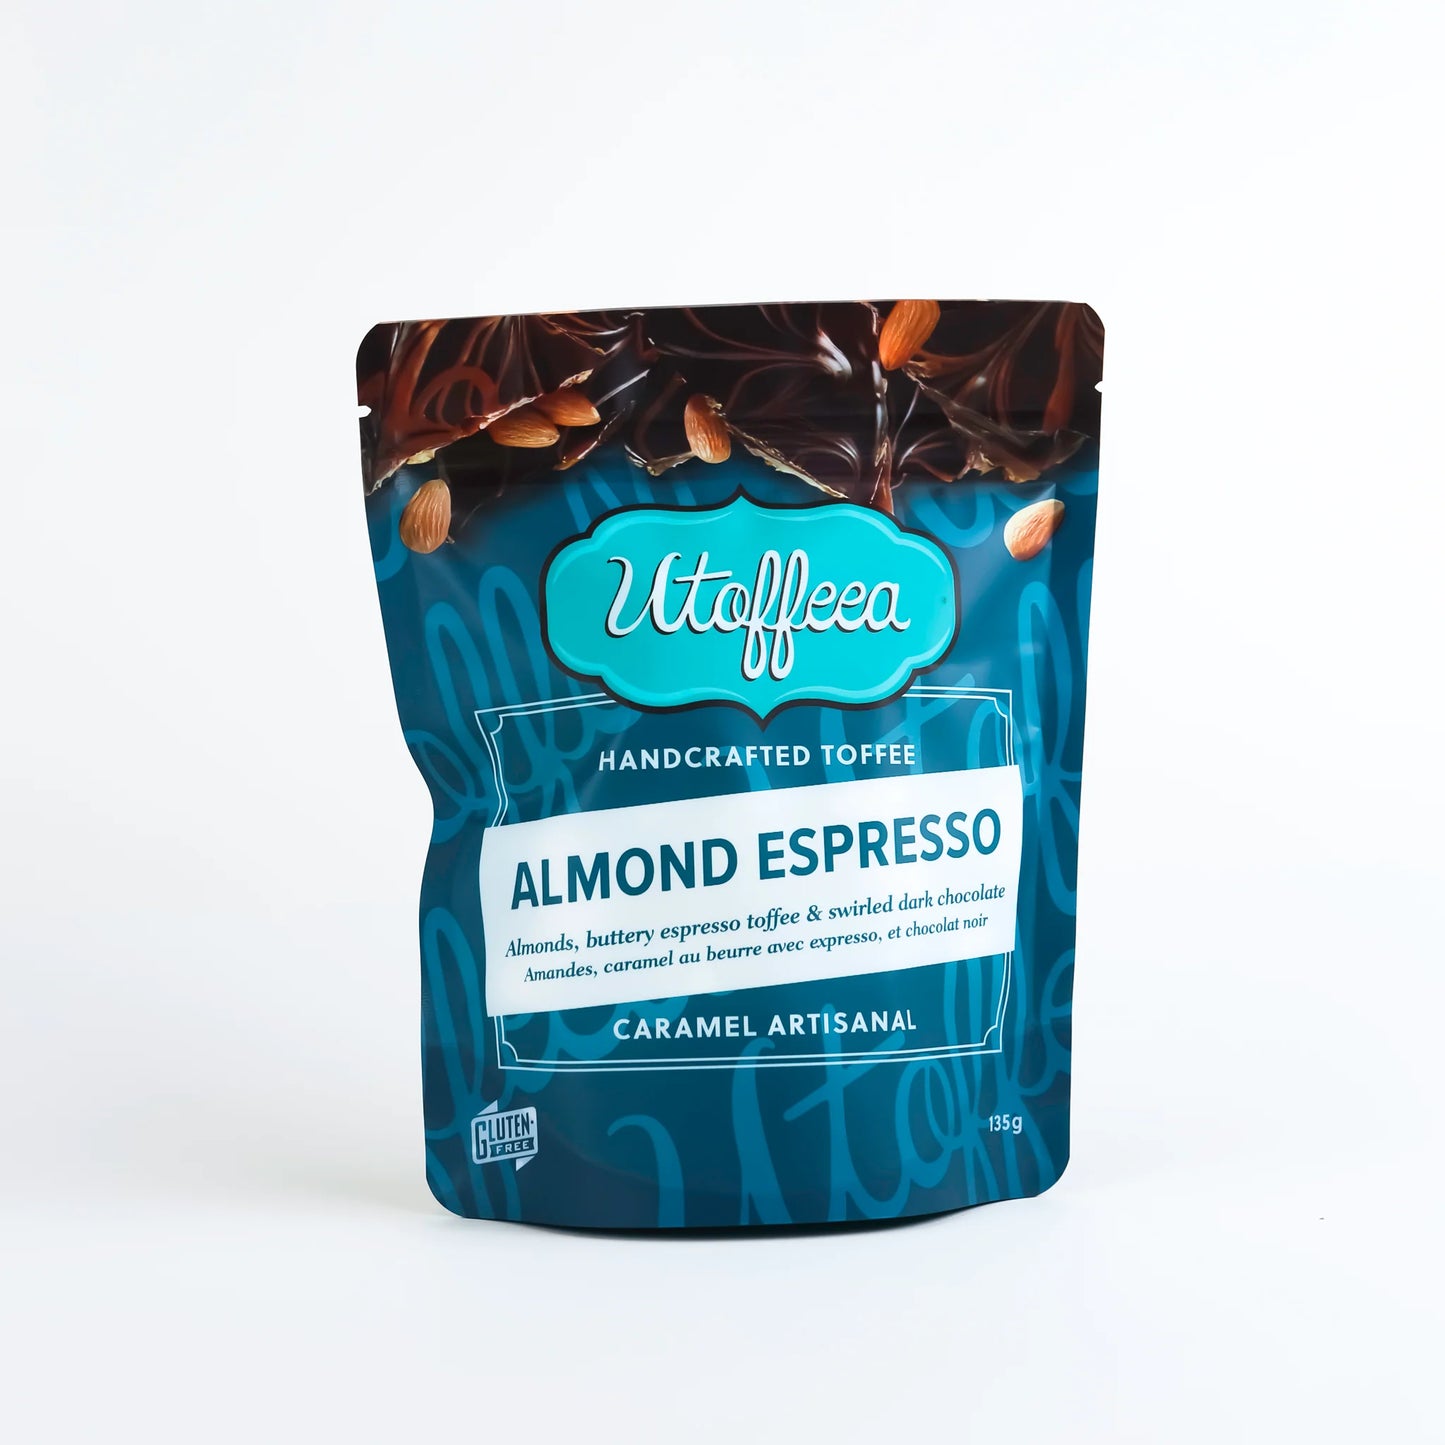 Handcrafted Toffee - Almond Espresso